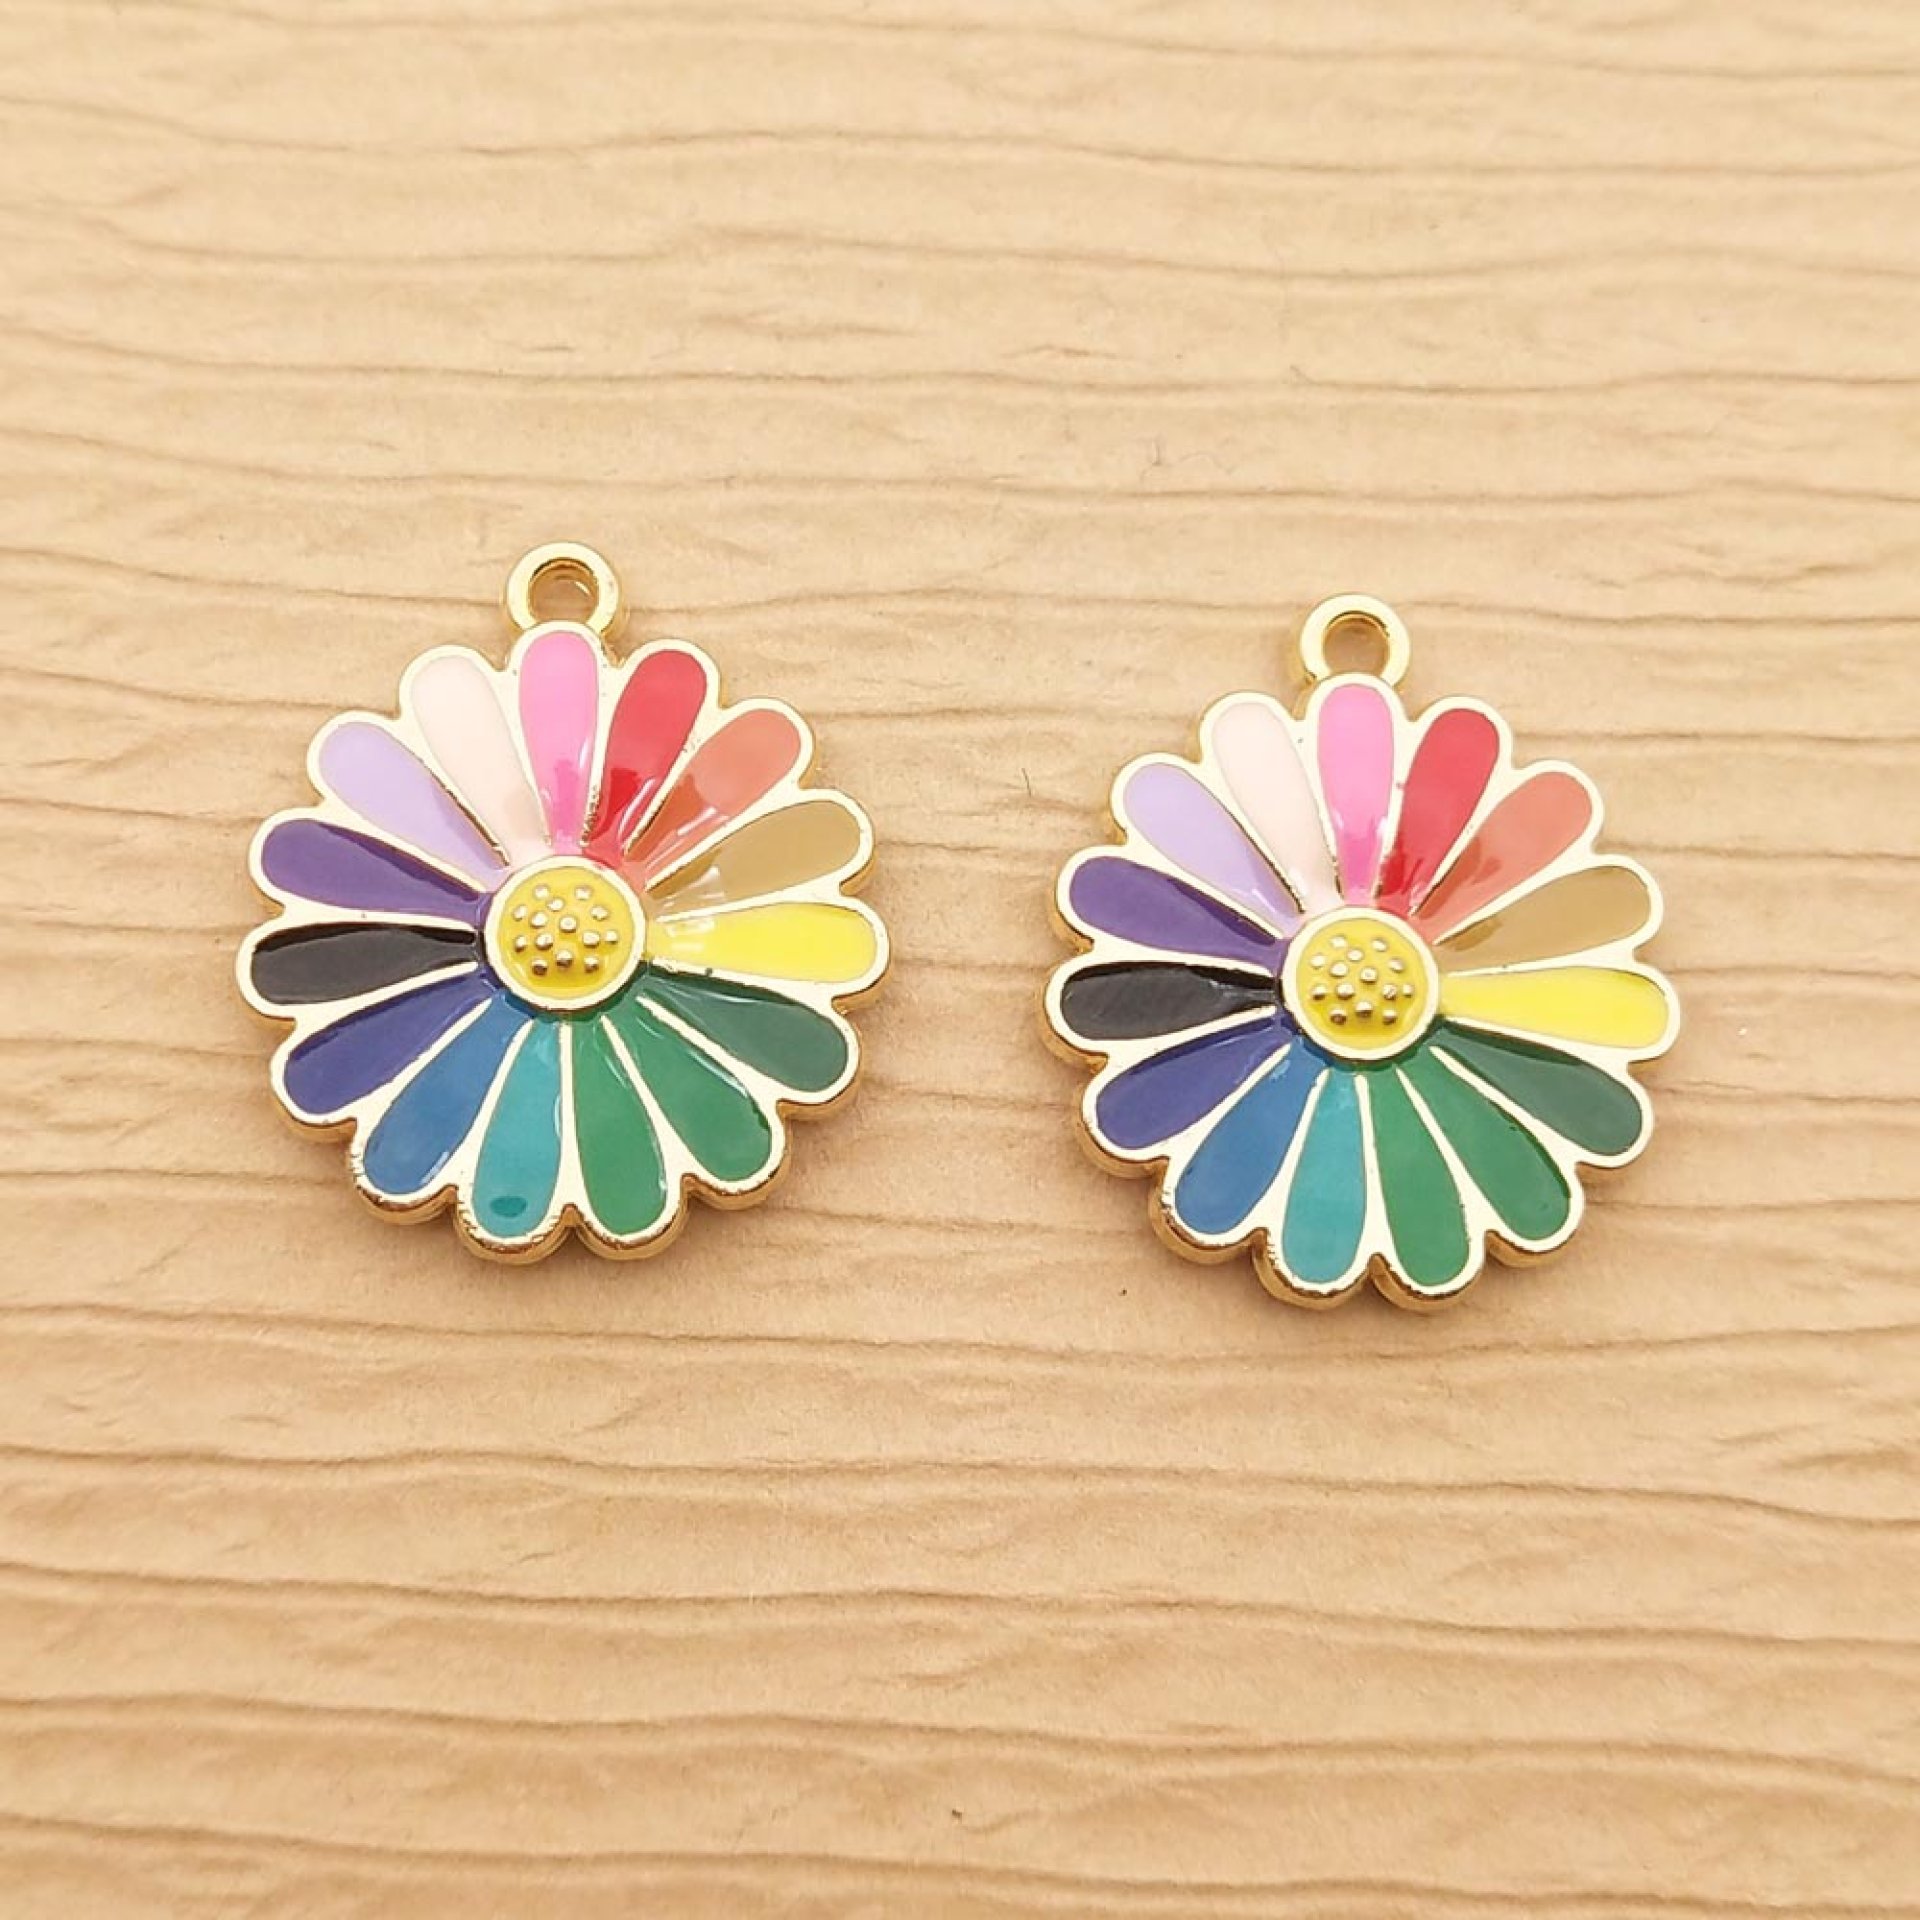  SSYHQAX 35 pcs Alloy Enamel Daisy Flower Charms Spring Floral  Themed Charms Various Jewelry Making Necklace Bracelet Earring DIY Jewelry  Accessories Charms : Arts, Crafts & Sewing